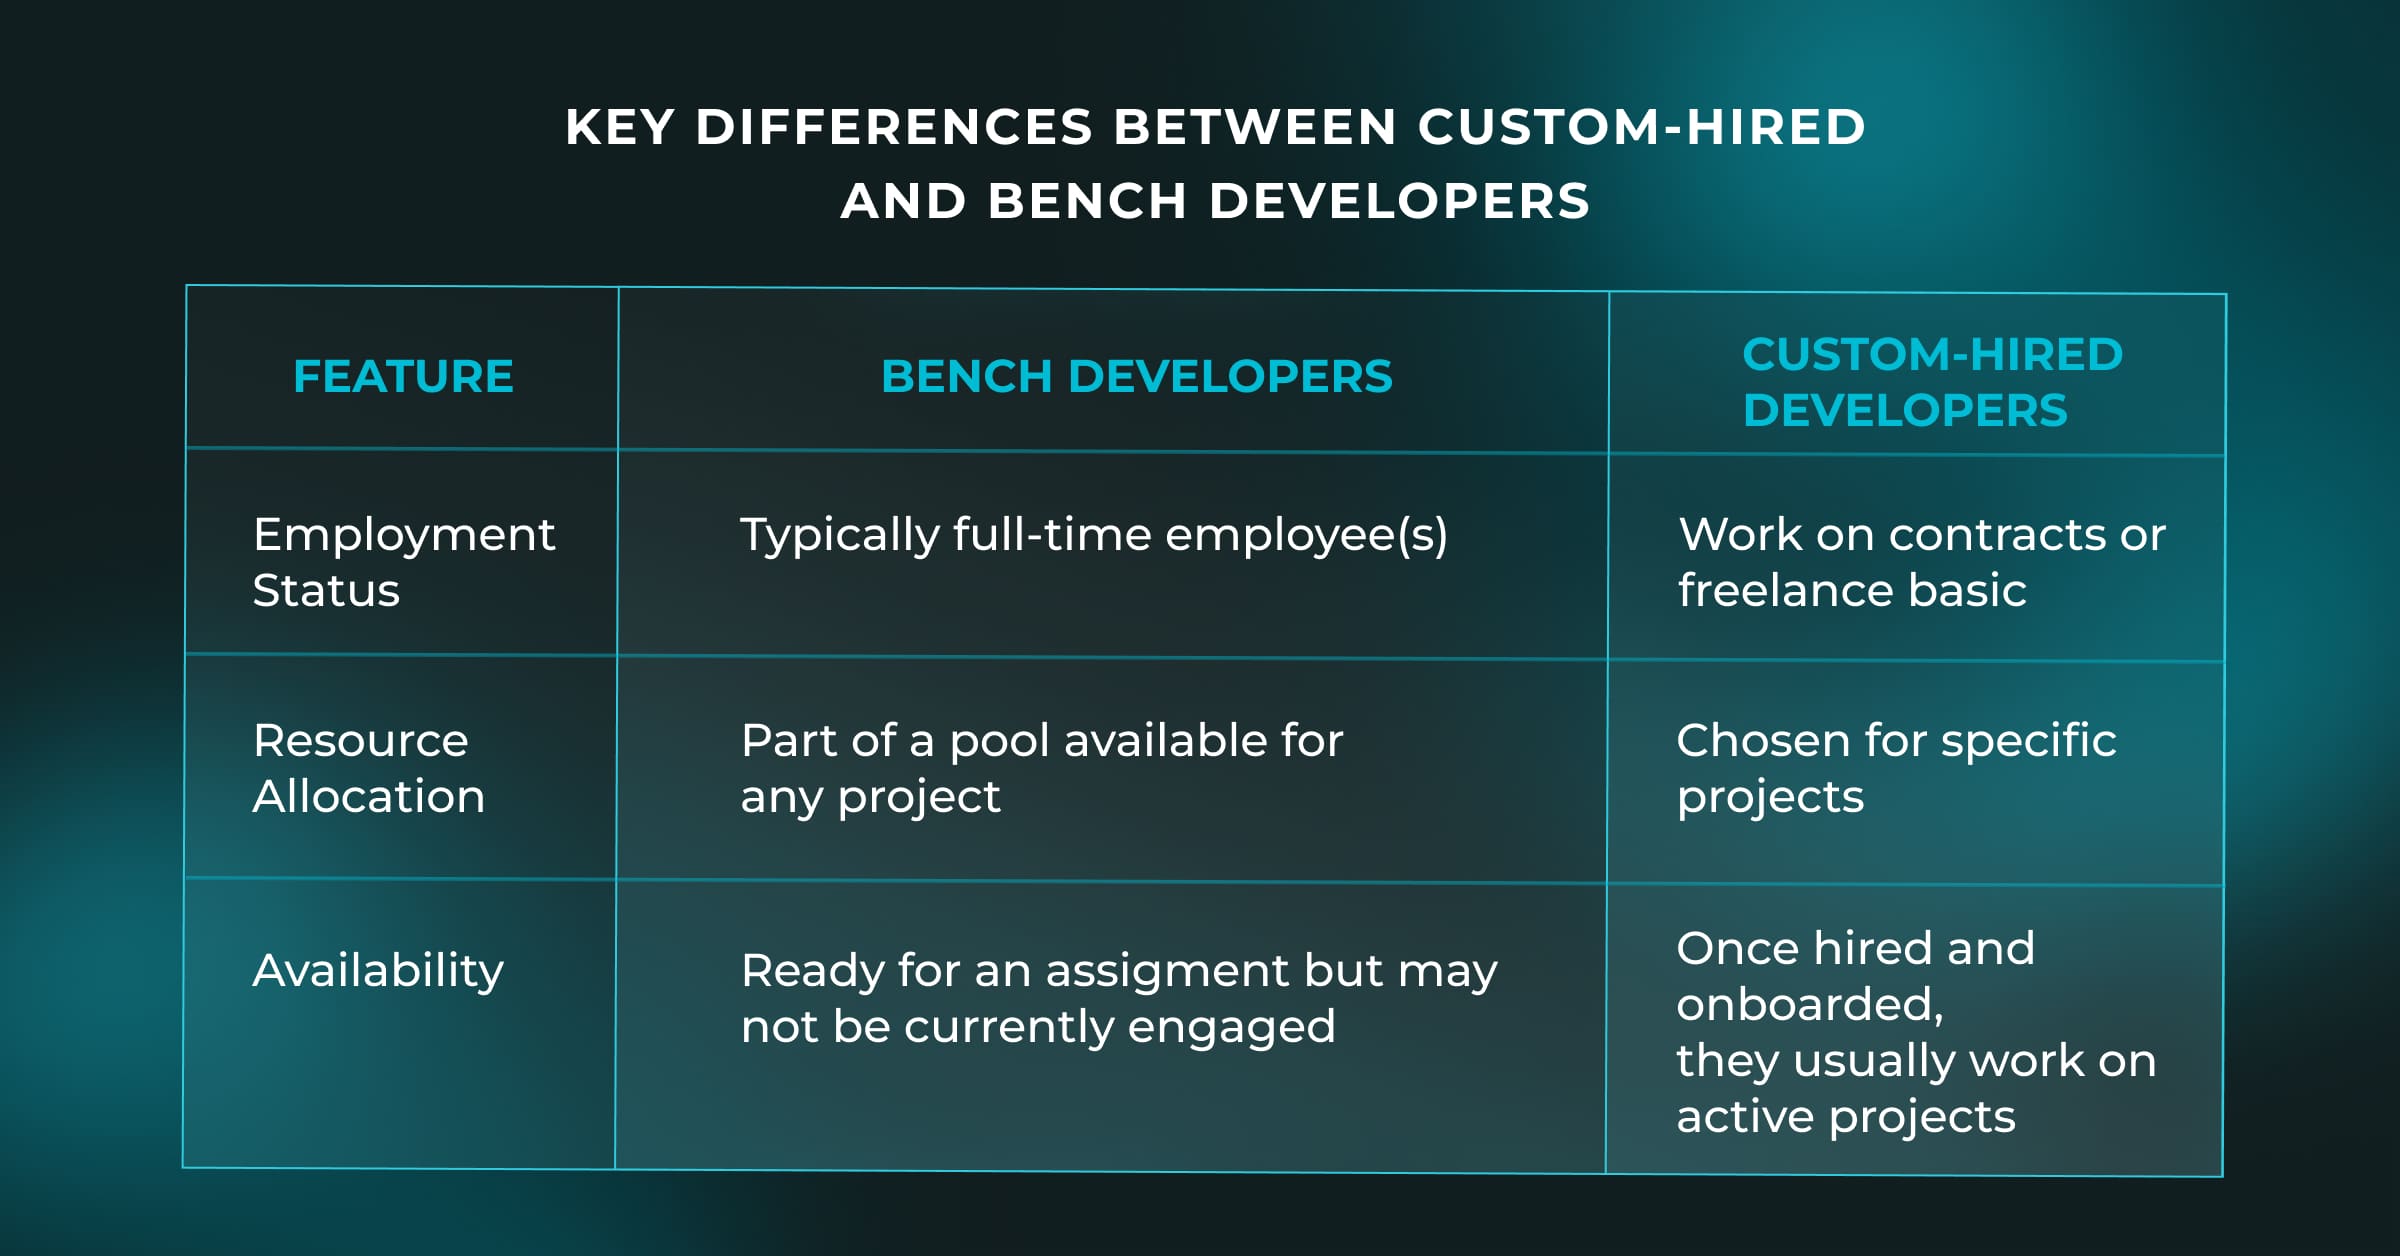 Differences Between Custom-Hired and Bench Developers